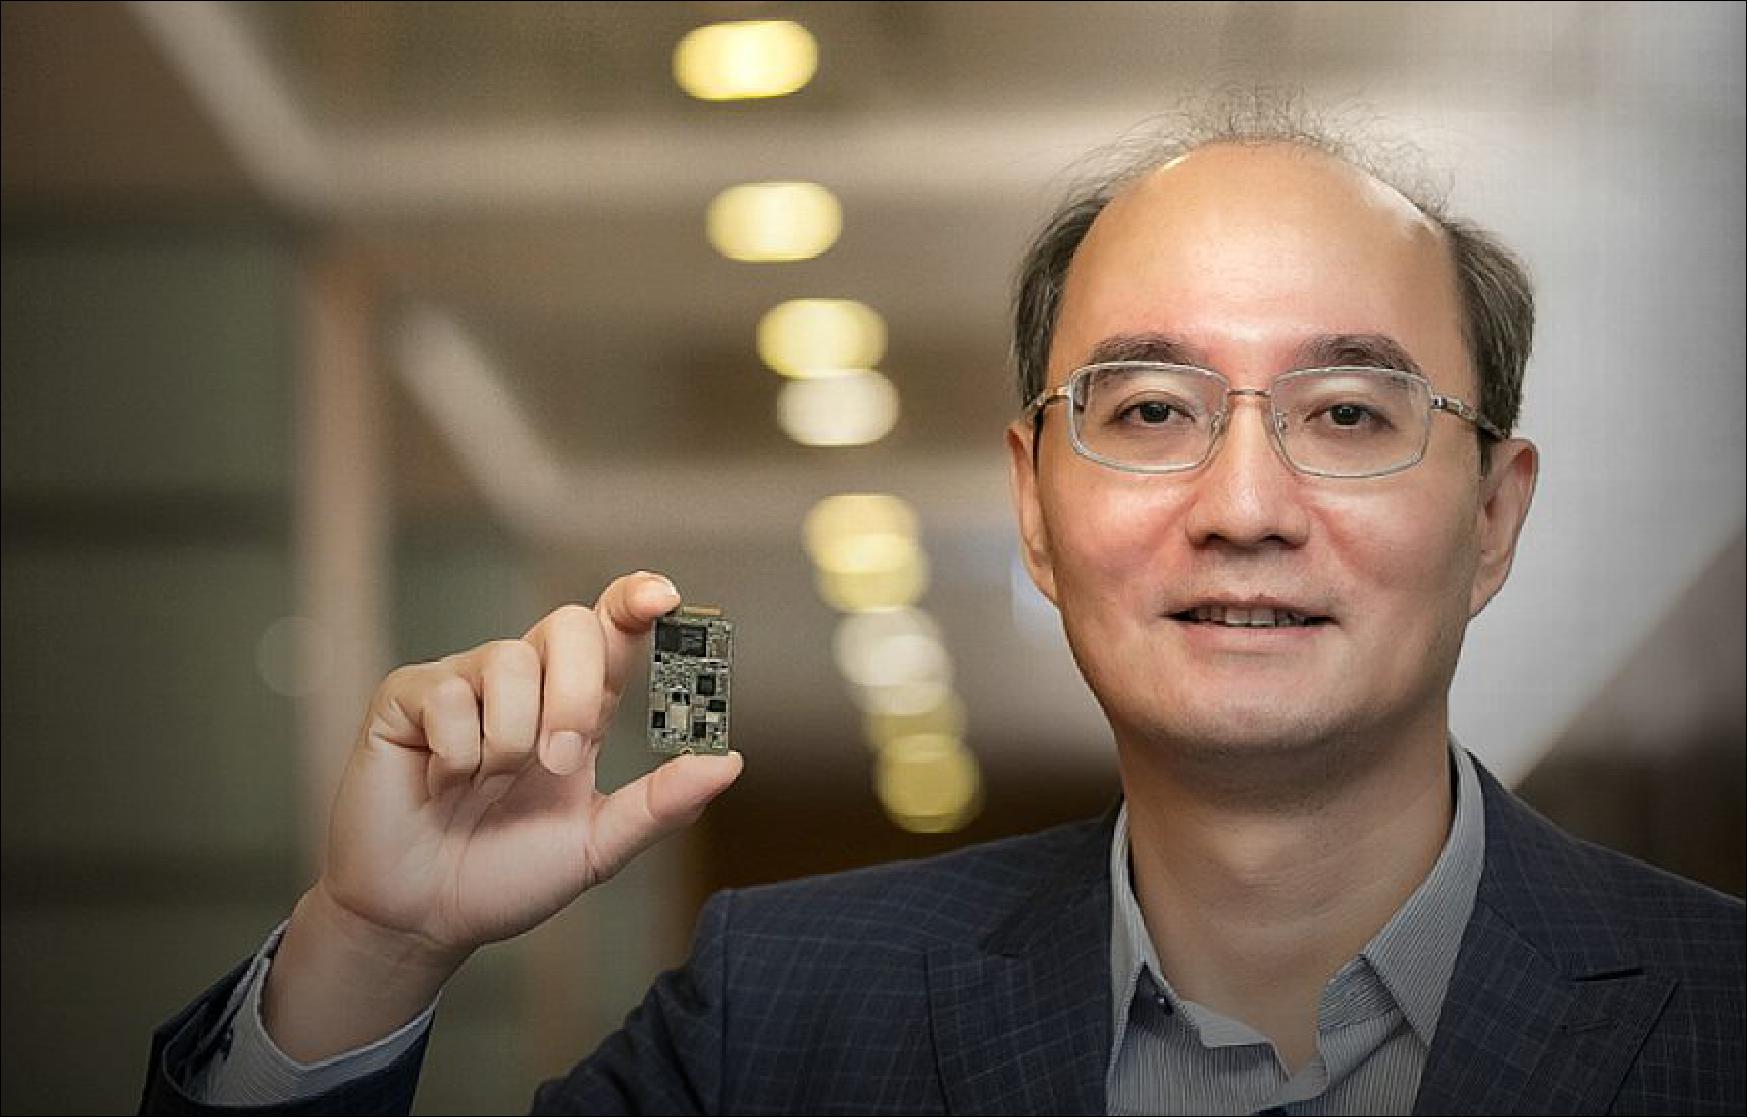 Figure 16: MediaTek President Joe Chen with the reference designs for the company’s T700 5G data card solution for PCs (image credit: MediaTek)